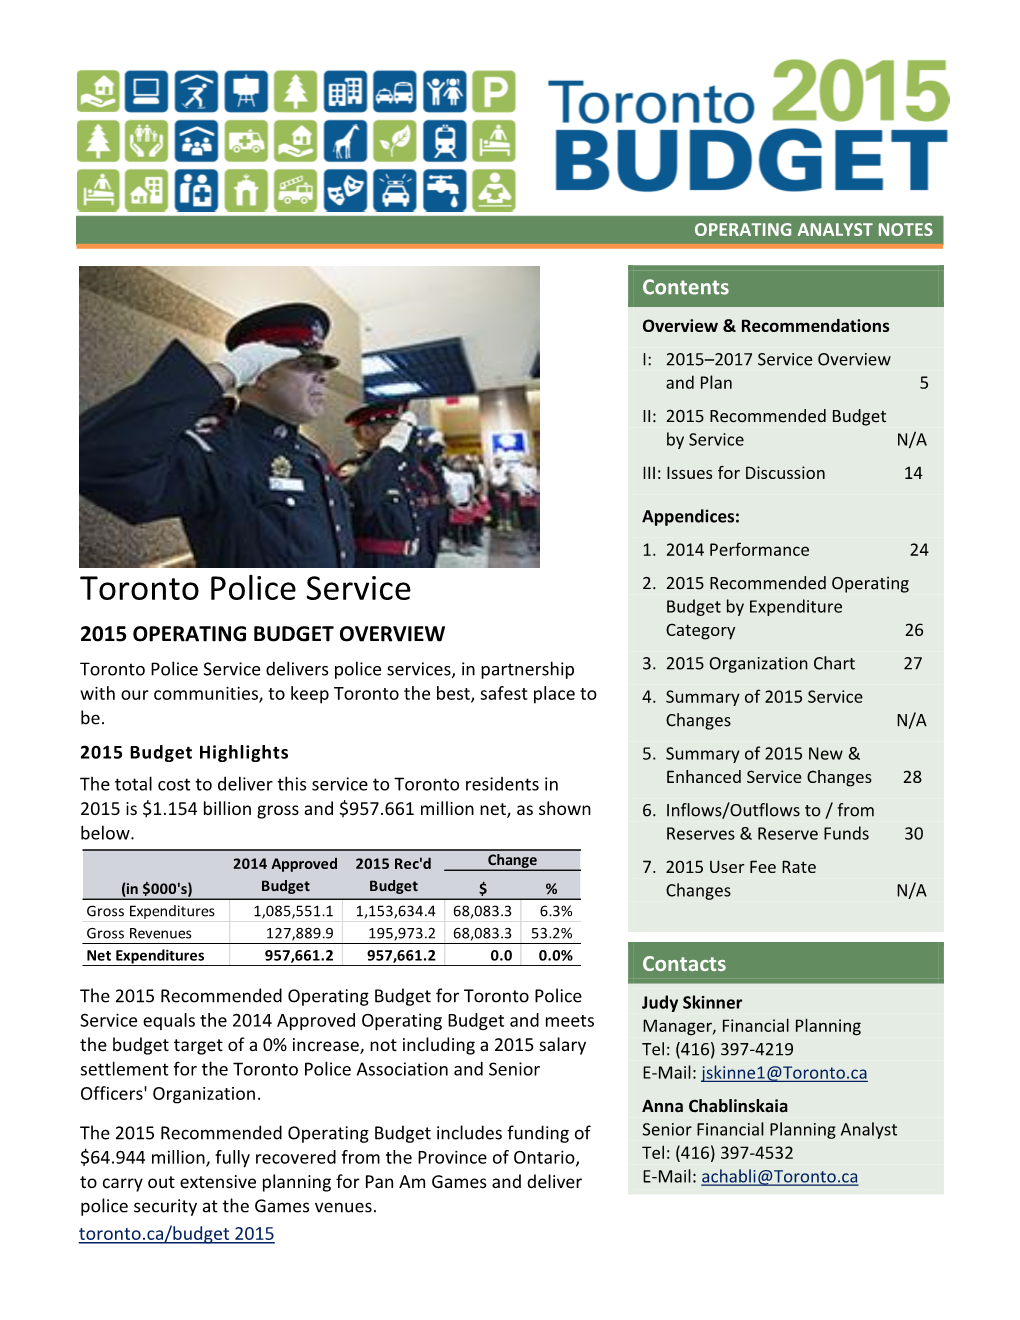 2015 OPERATING BUDGET OVERVIEW Category 26 Toronto Police Service Delivers Police Services, in Partnership 3